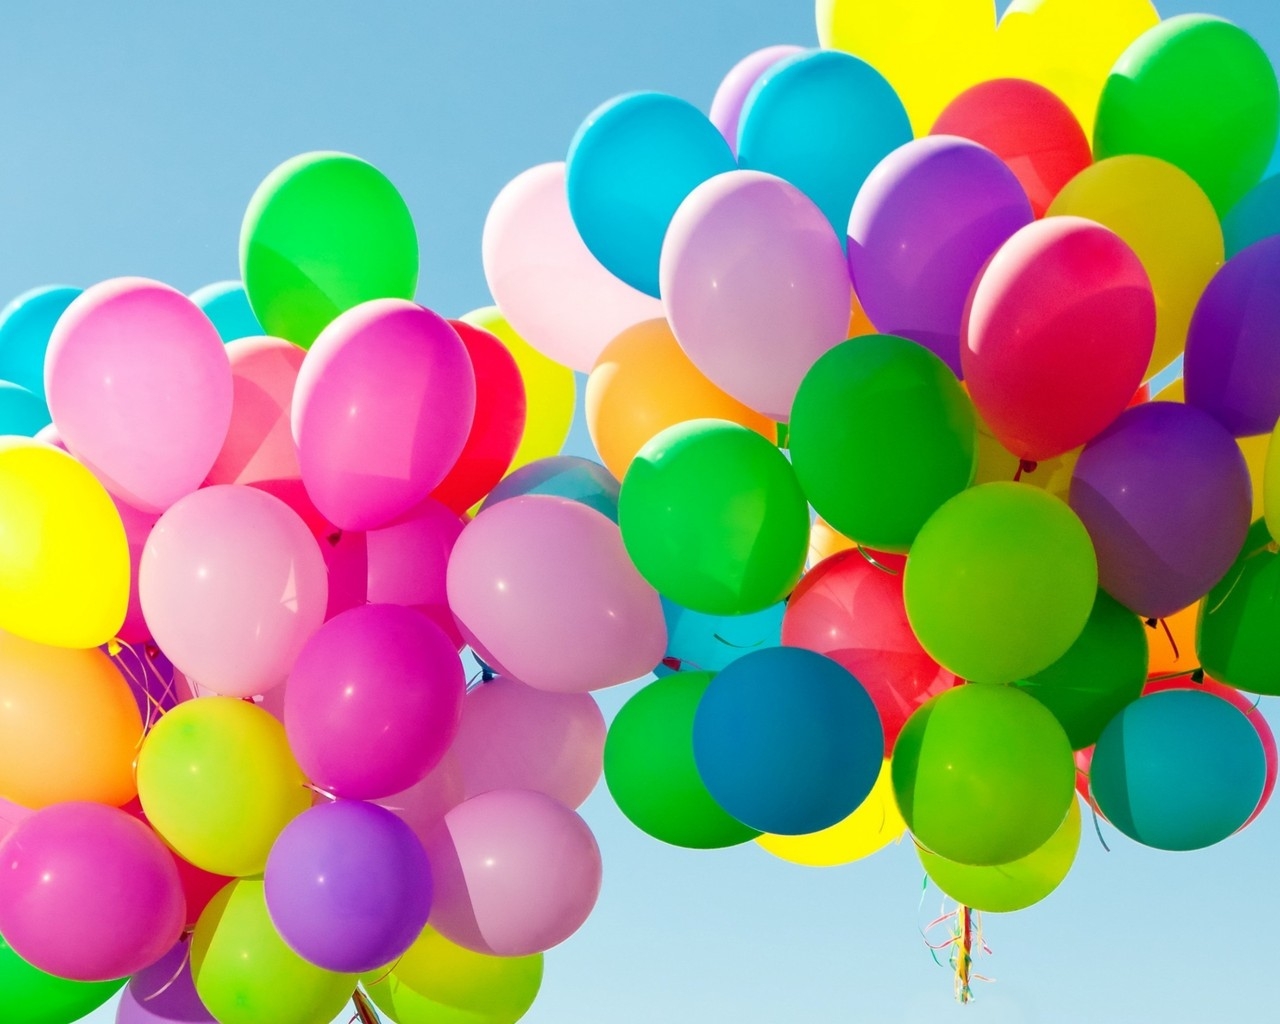 Colorful Balloons in the Sky for 1280 x 1024 resolution